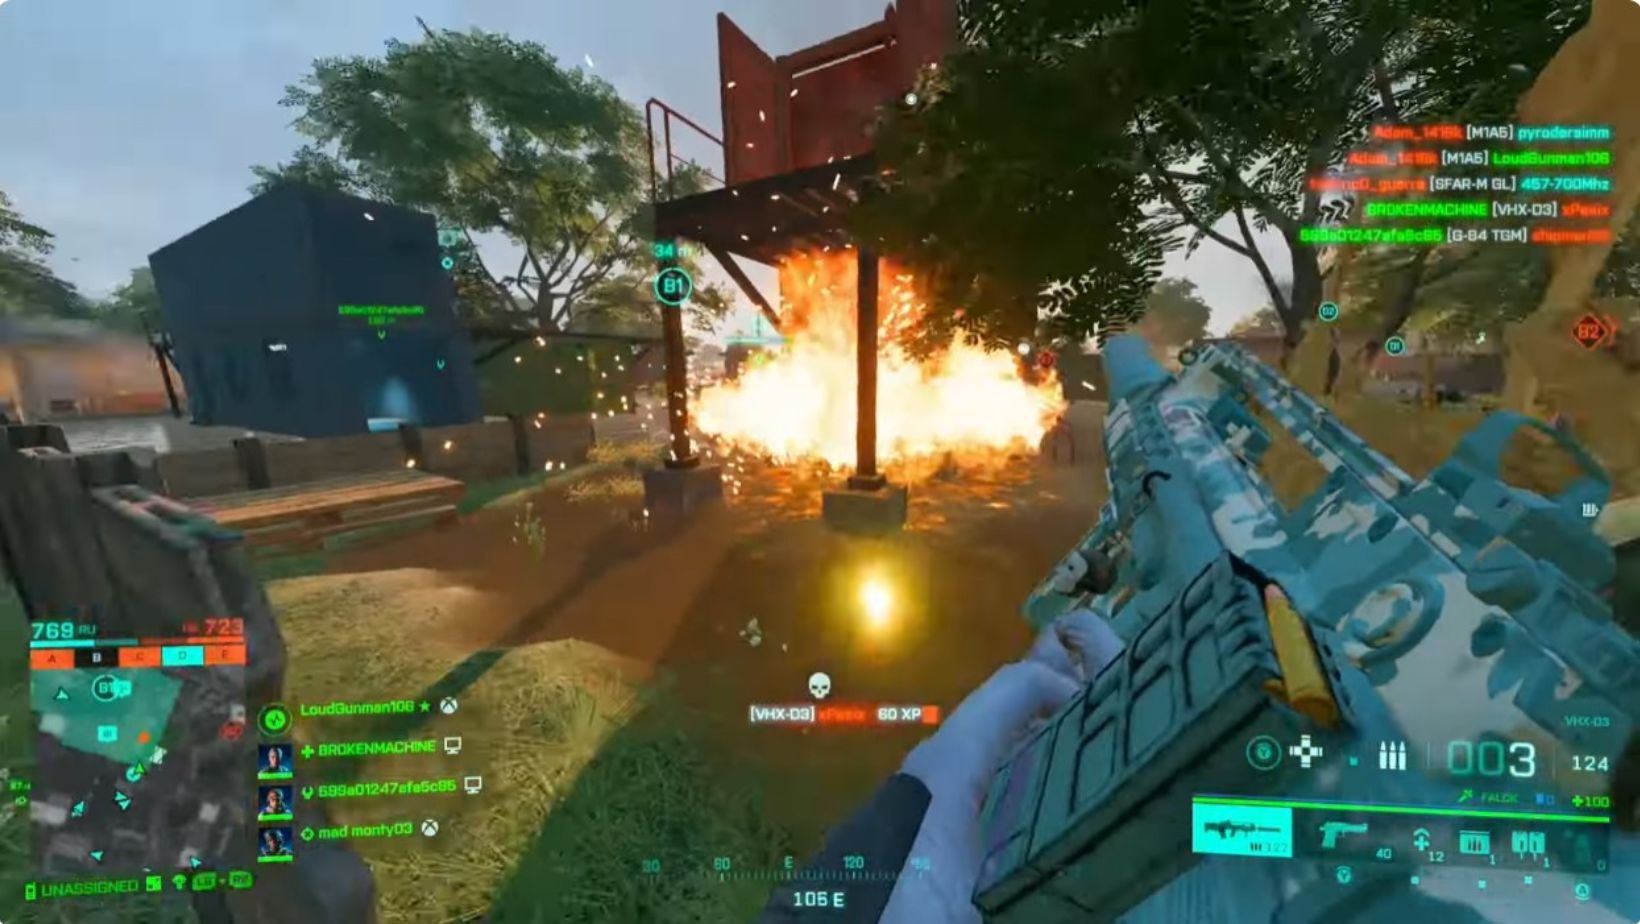 Battlefield 2042 Technical Playtest Reportedly Runs “Much Smoother” on Xbox Consoles than PC